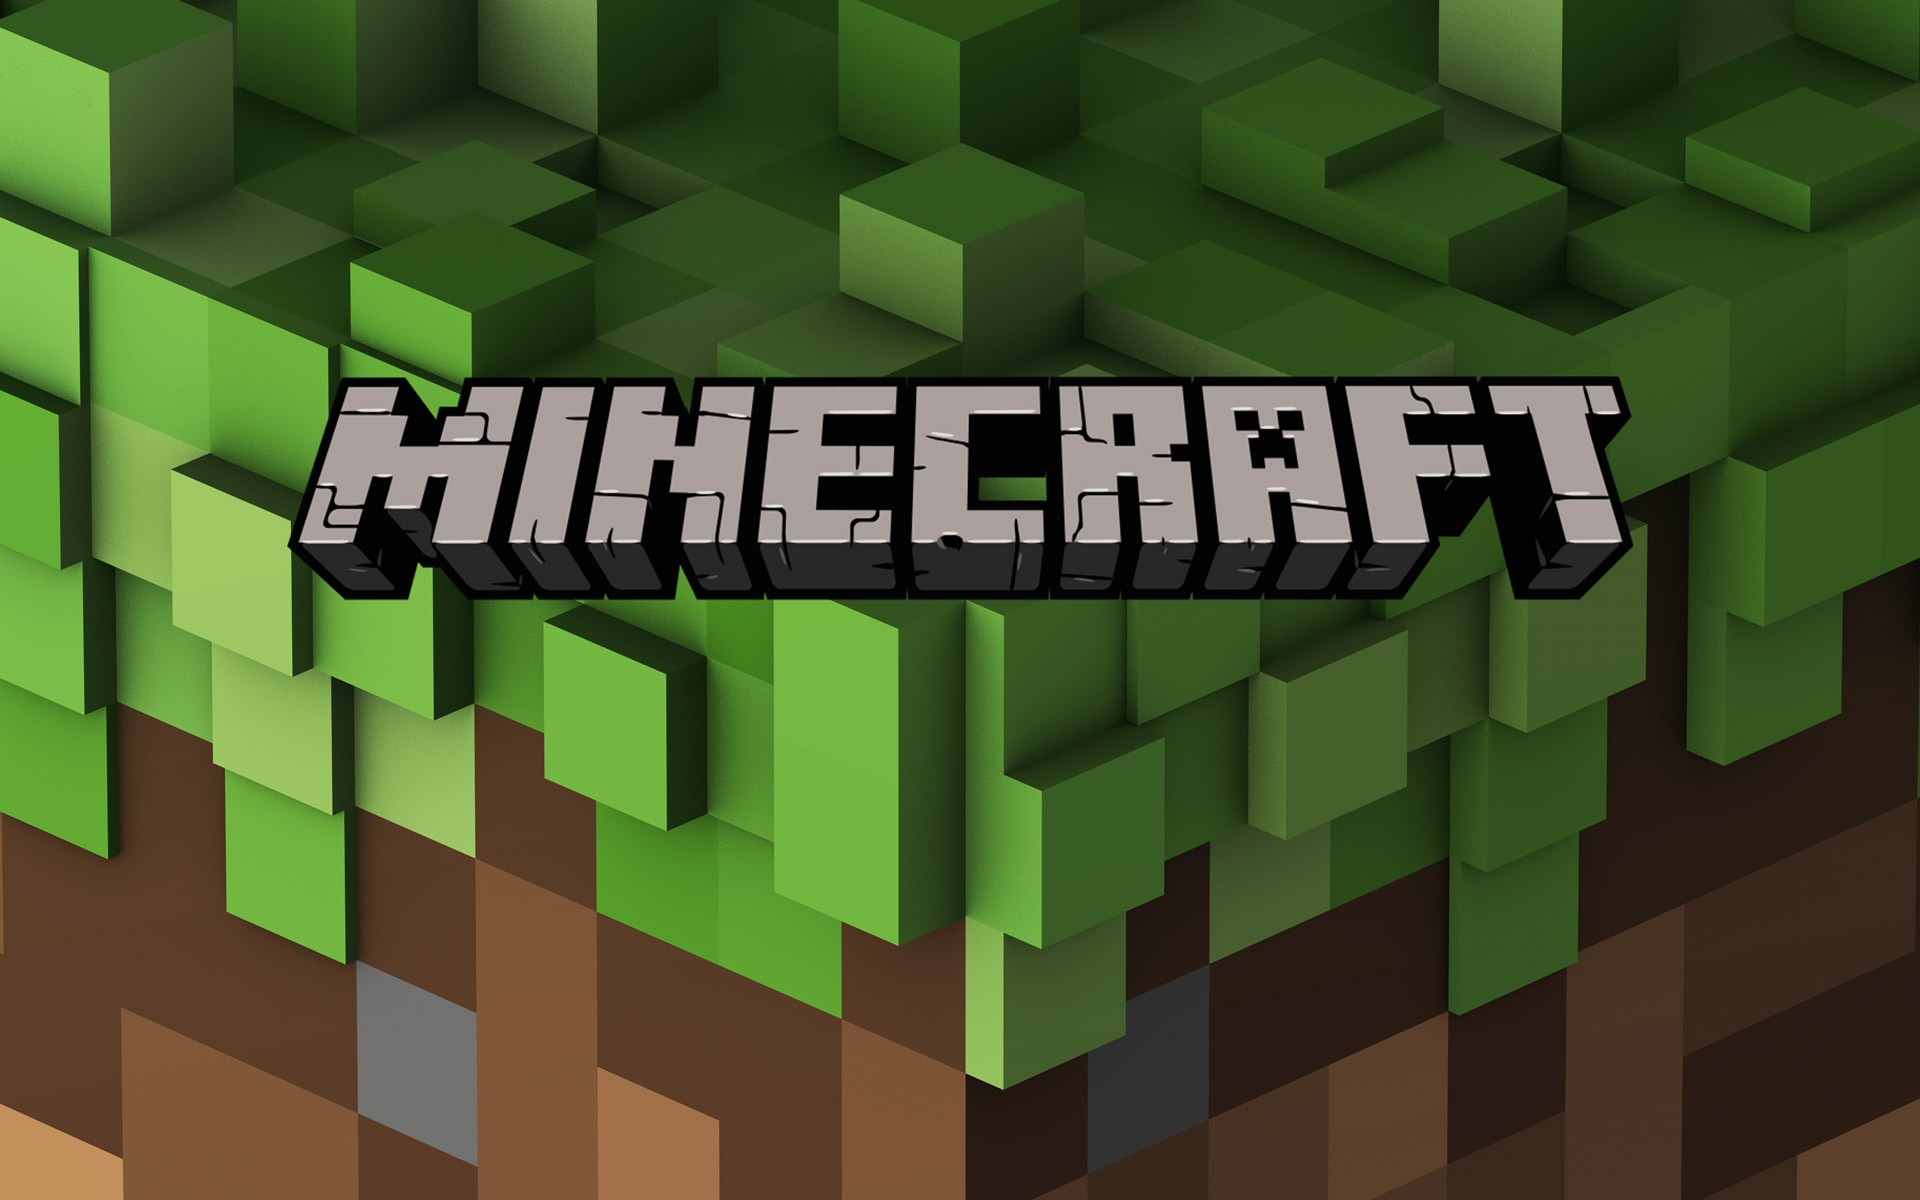 Minecraft: Java Edition reaches version 1.20 with Snapshot 22w46a and experimental features
